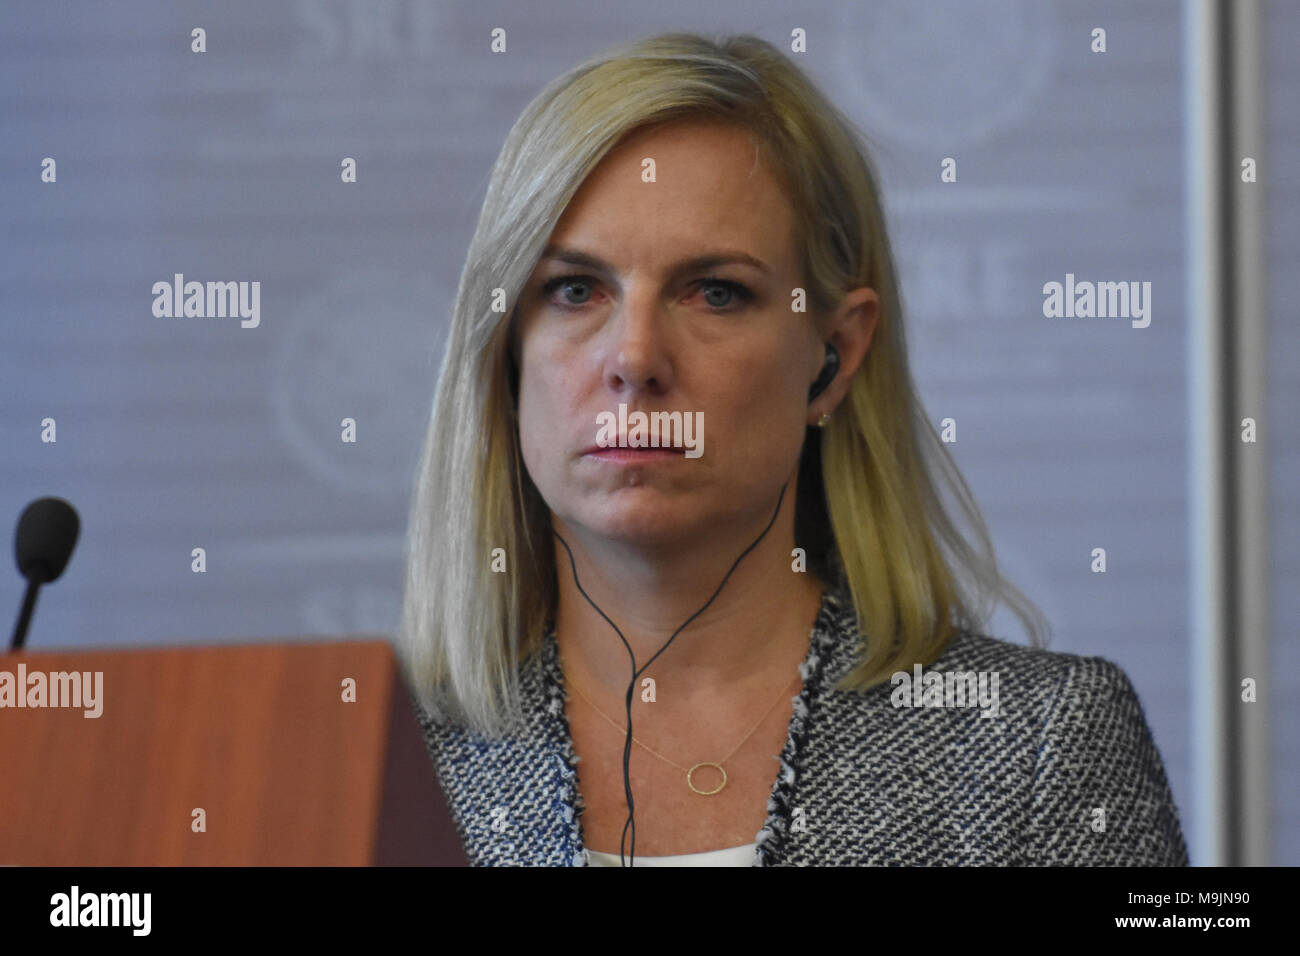 CIDADE DO MÉXICO, DF - 26.03.2018: KIRSTJEN NIELSEN VISITA DE TRABALHO AO MÉX - United States Secretary of Homeland Security Kirstjen Nielsen during a press conference, she talking about Migration and Security Mexico- US as part of her working visit to Ministry of Foreign Affairs on March 26, 2018 in Mexico City, Mexico (Photo: Carlos Tischler/Fotoarena) Stock Photo